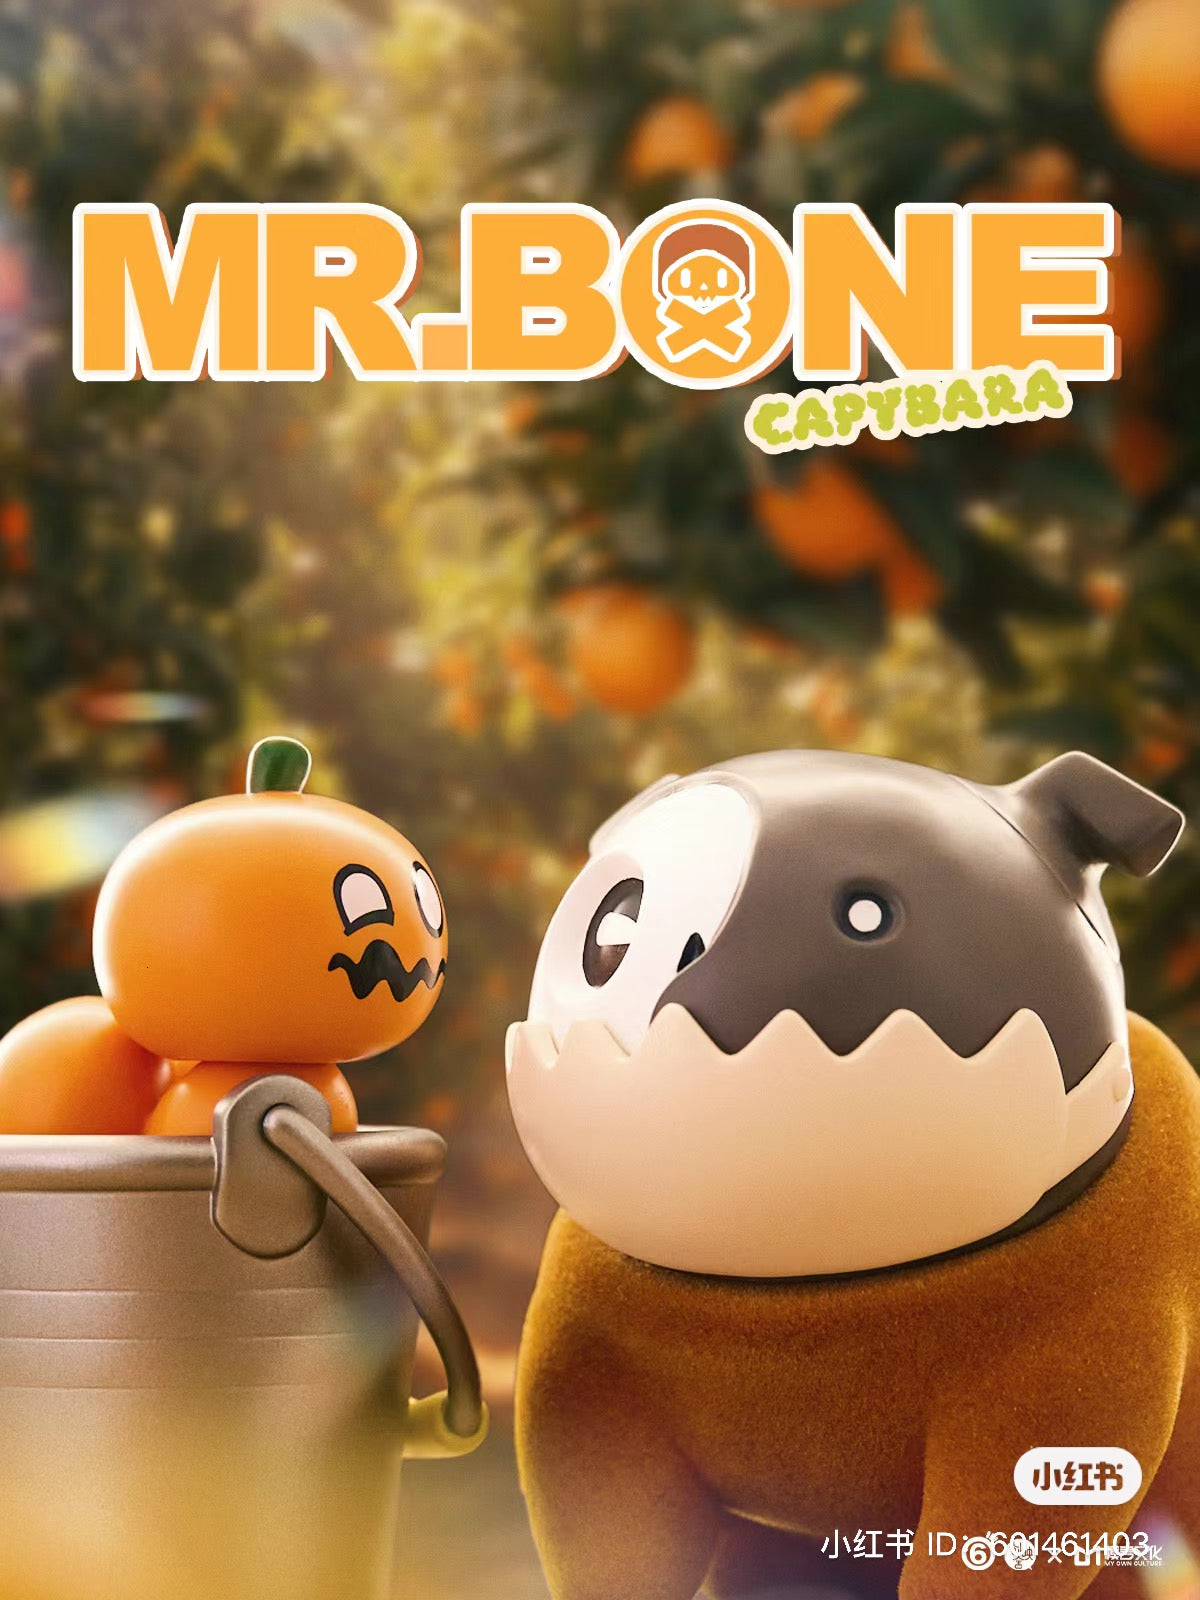 A blind box toy: Mr Bone Capybaras preorder for May 2024. PVC/ABS vinyl, 12CM high. Includes dog. Image: toy animal near oranges, cartoon style.